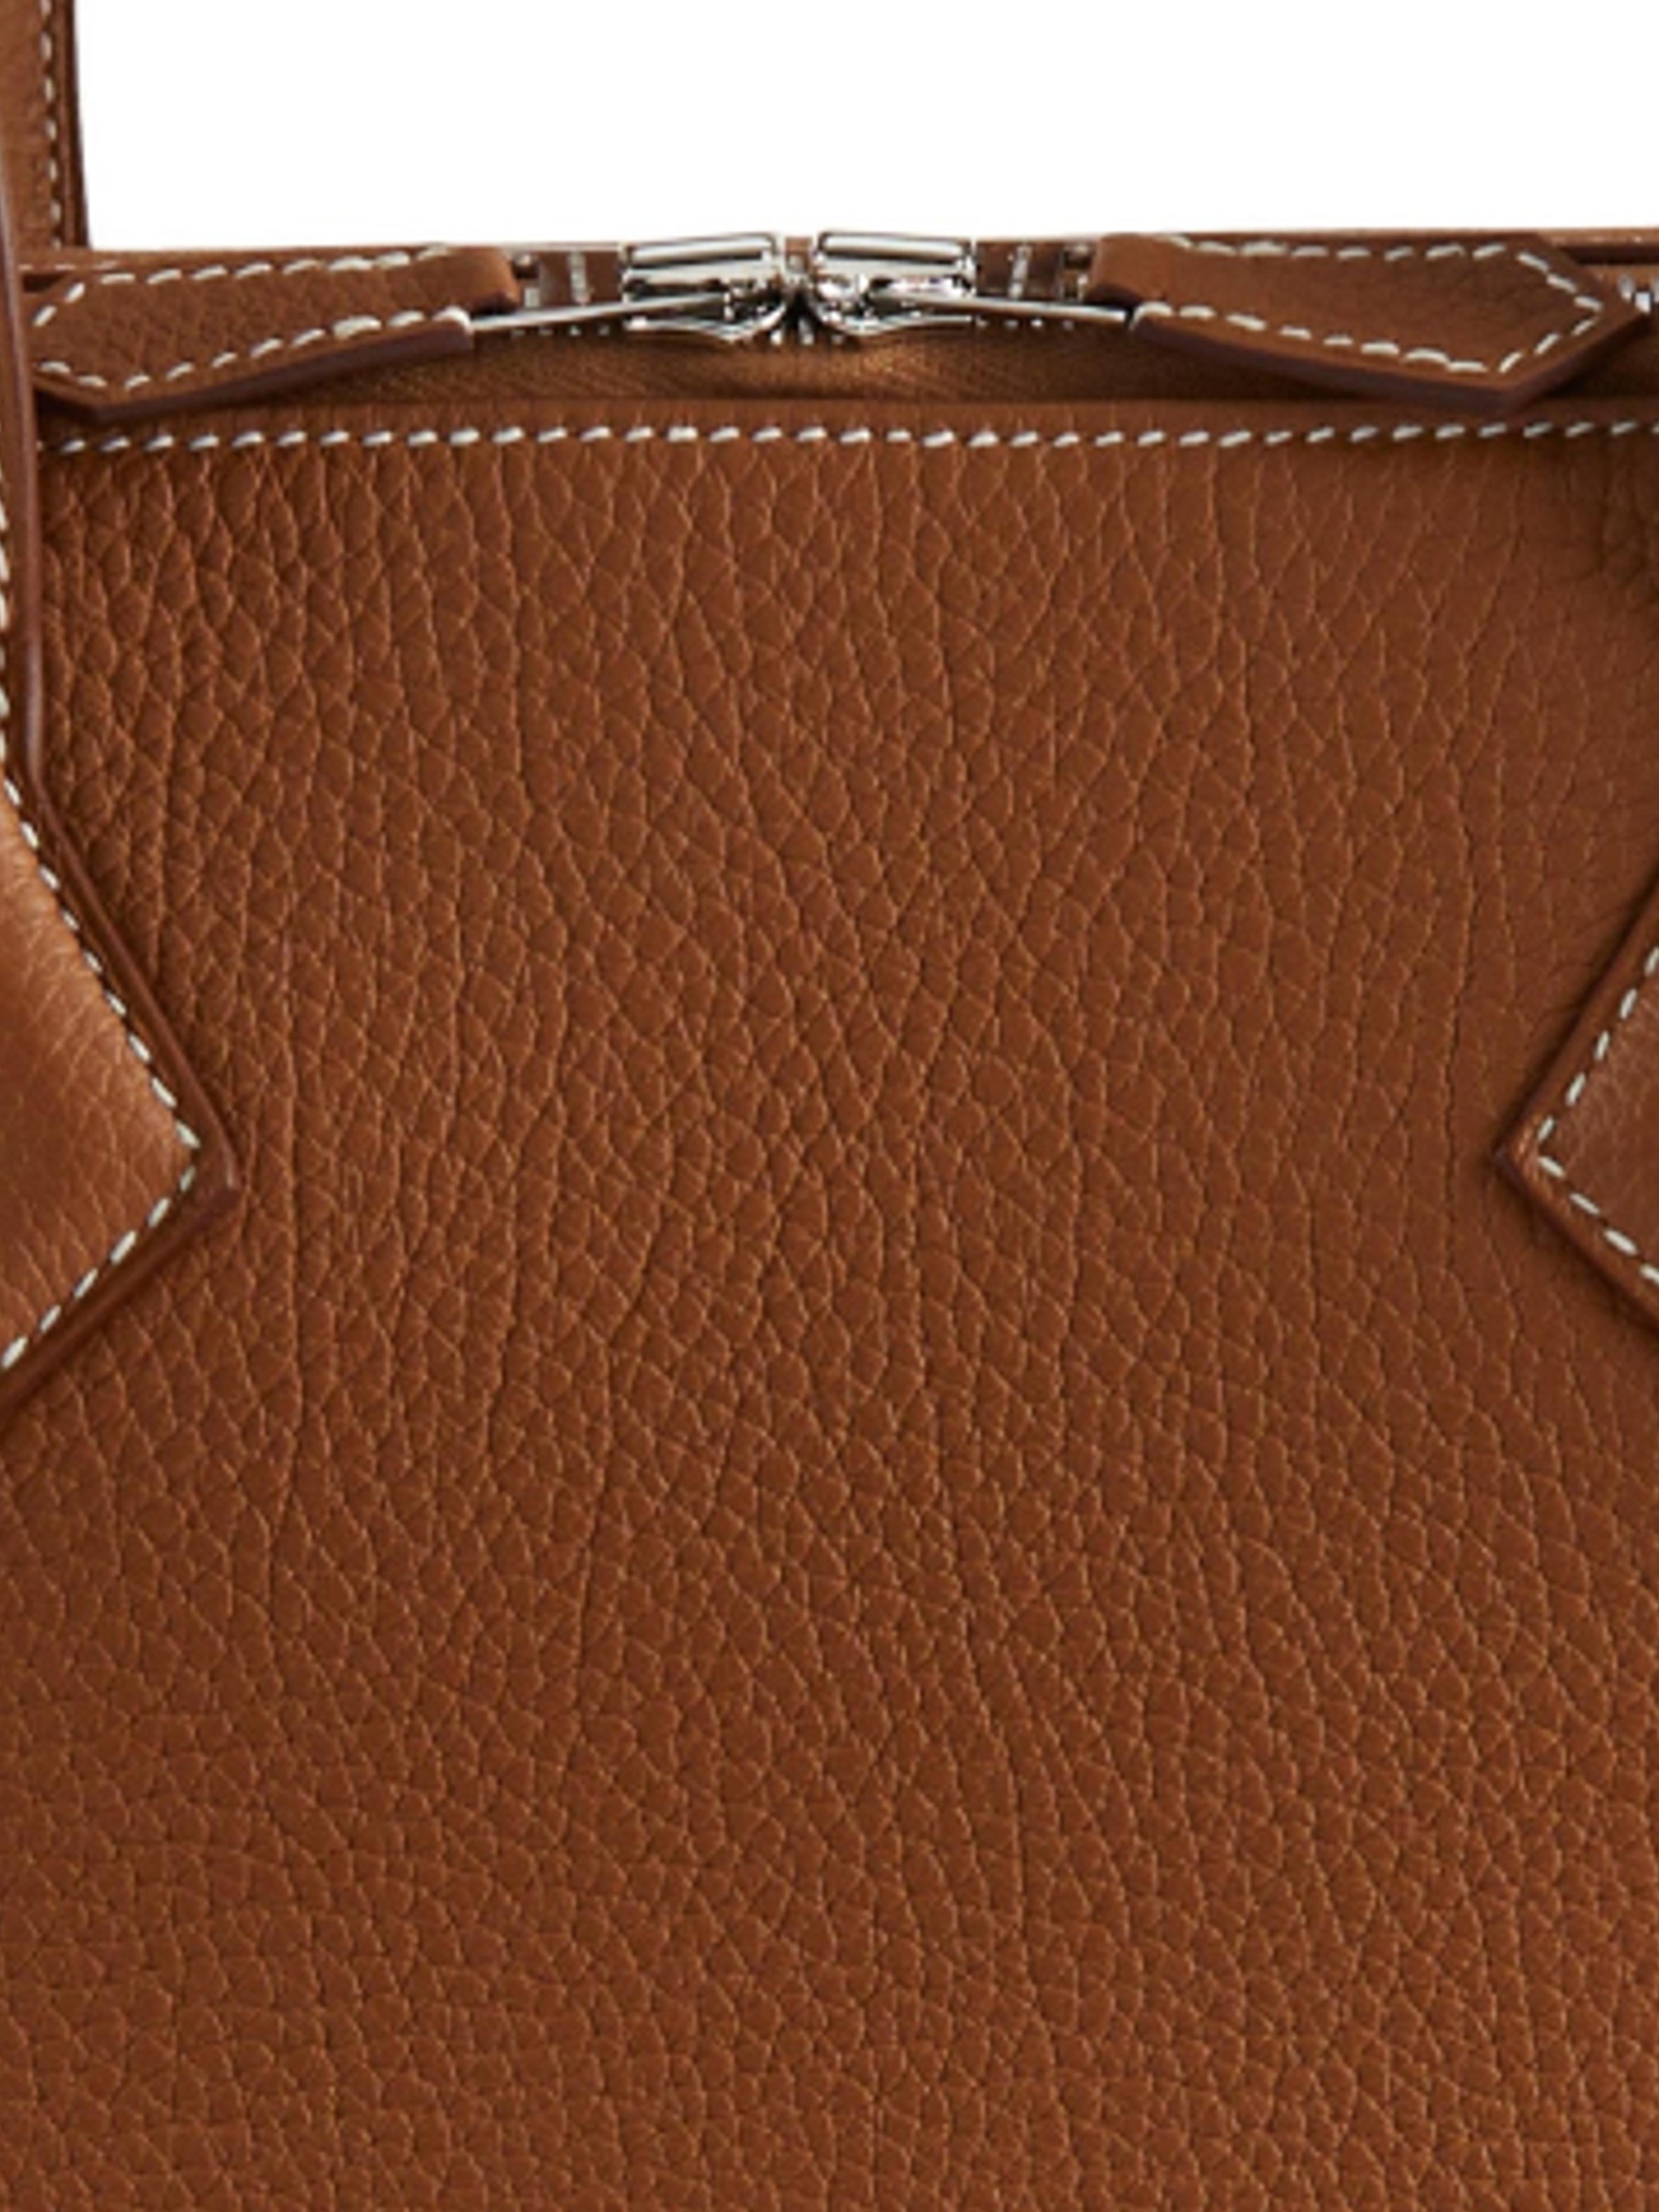 HERMÈS PORTE-DOCUMENTS VICTORIA GOLD Togo Leather with Palladium Hardware In Excellent Condition For Sale In London, GB